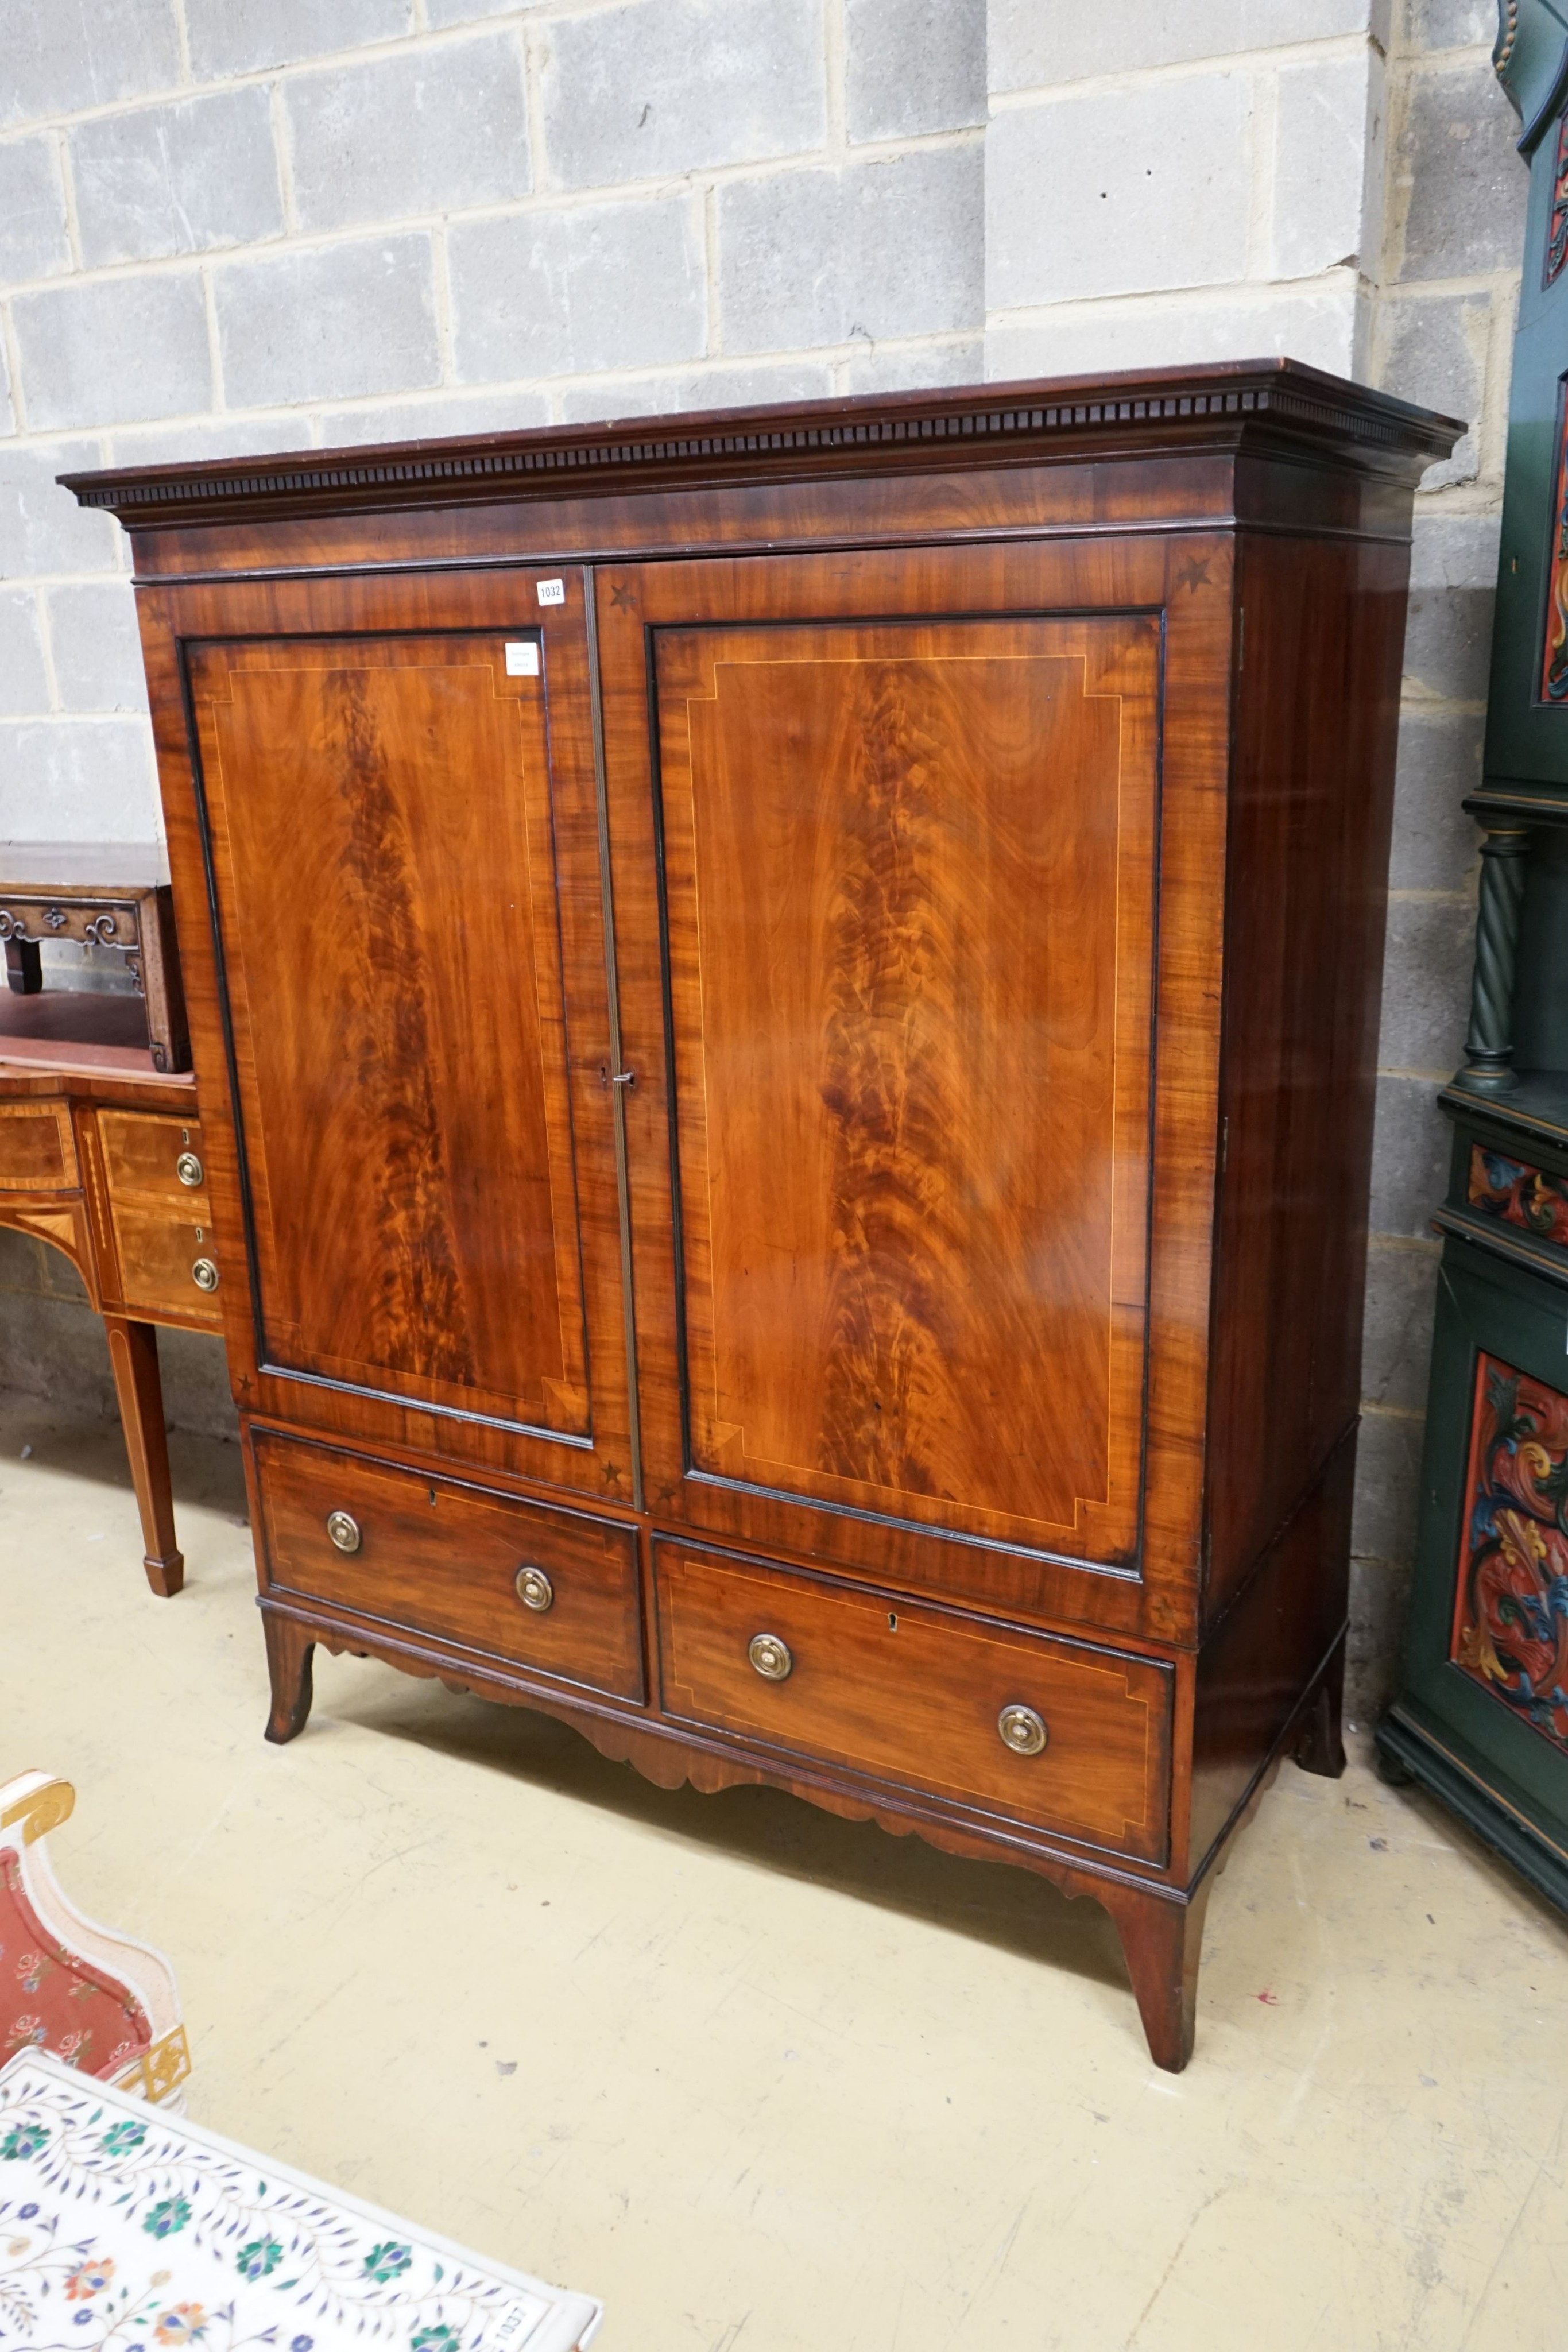 A 19th century mahogany linen press of small proportions, with panelled flamed mahogany doors centered with inlaid star motifs, width 133cm, depth 60cm, height 196cm